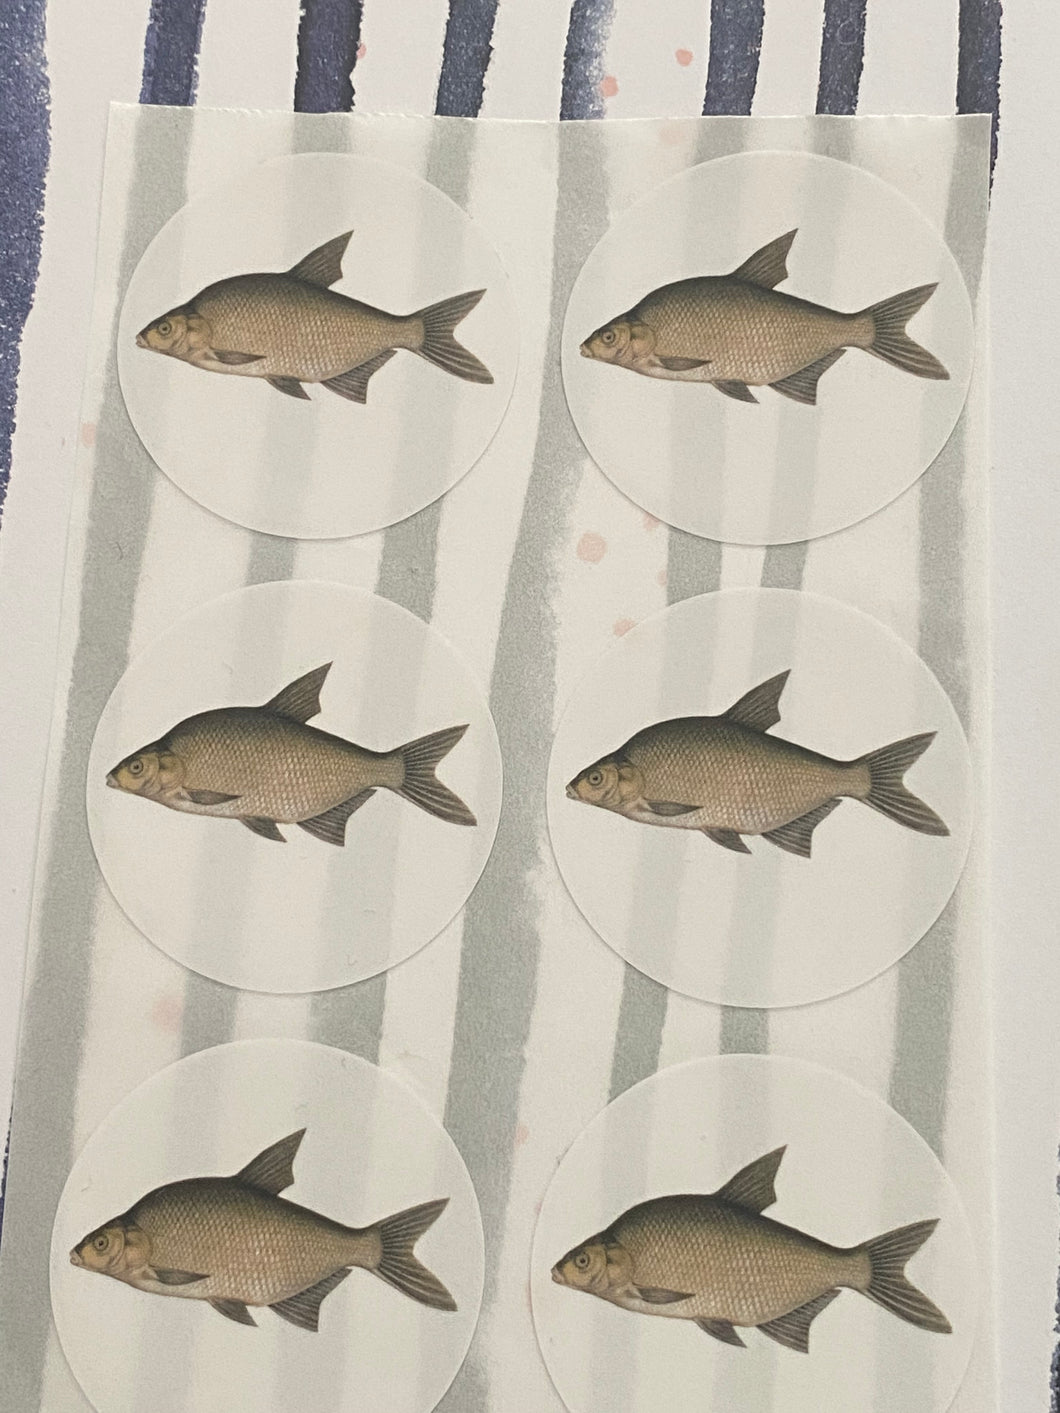 Fishes round stickers